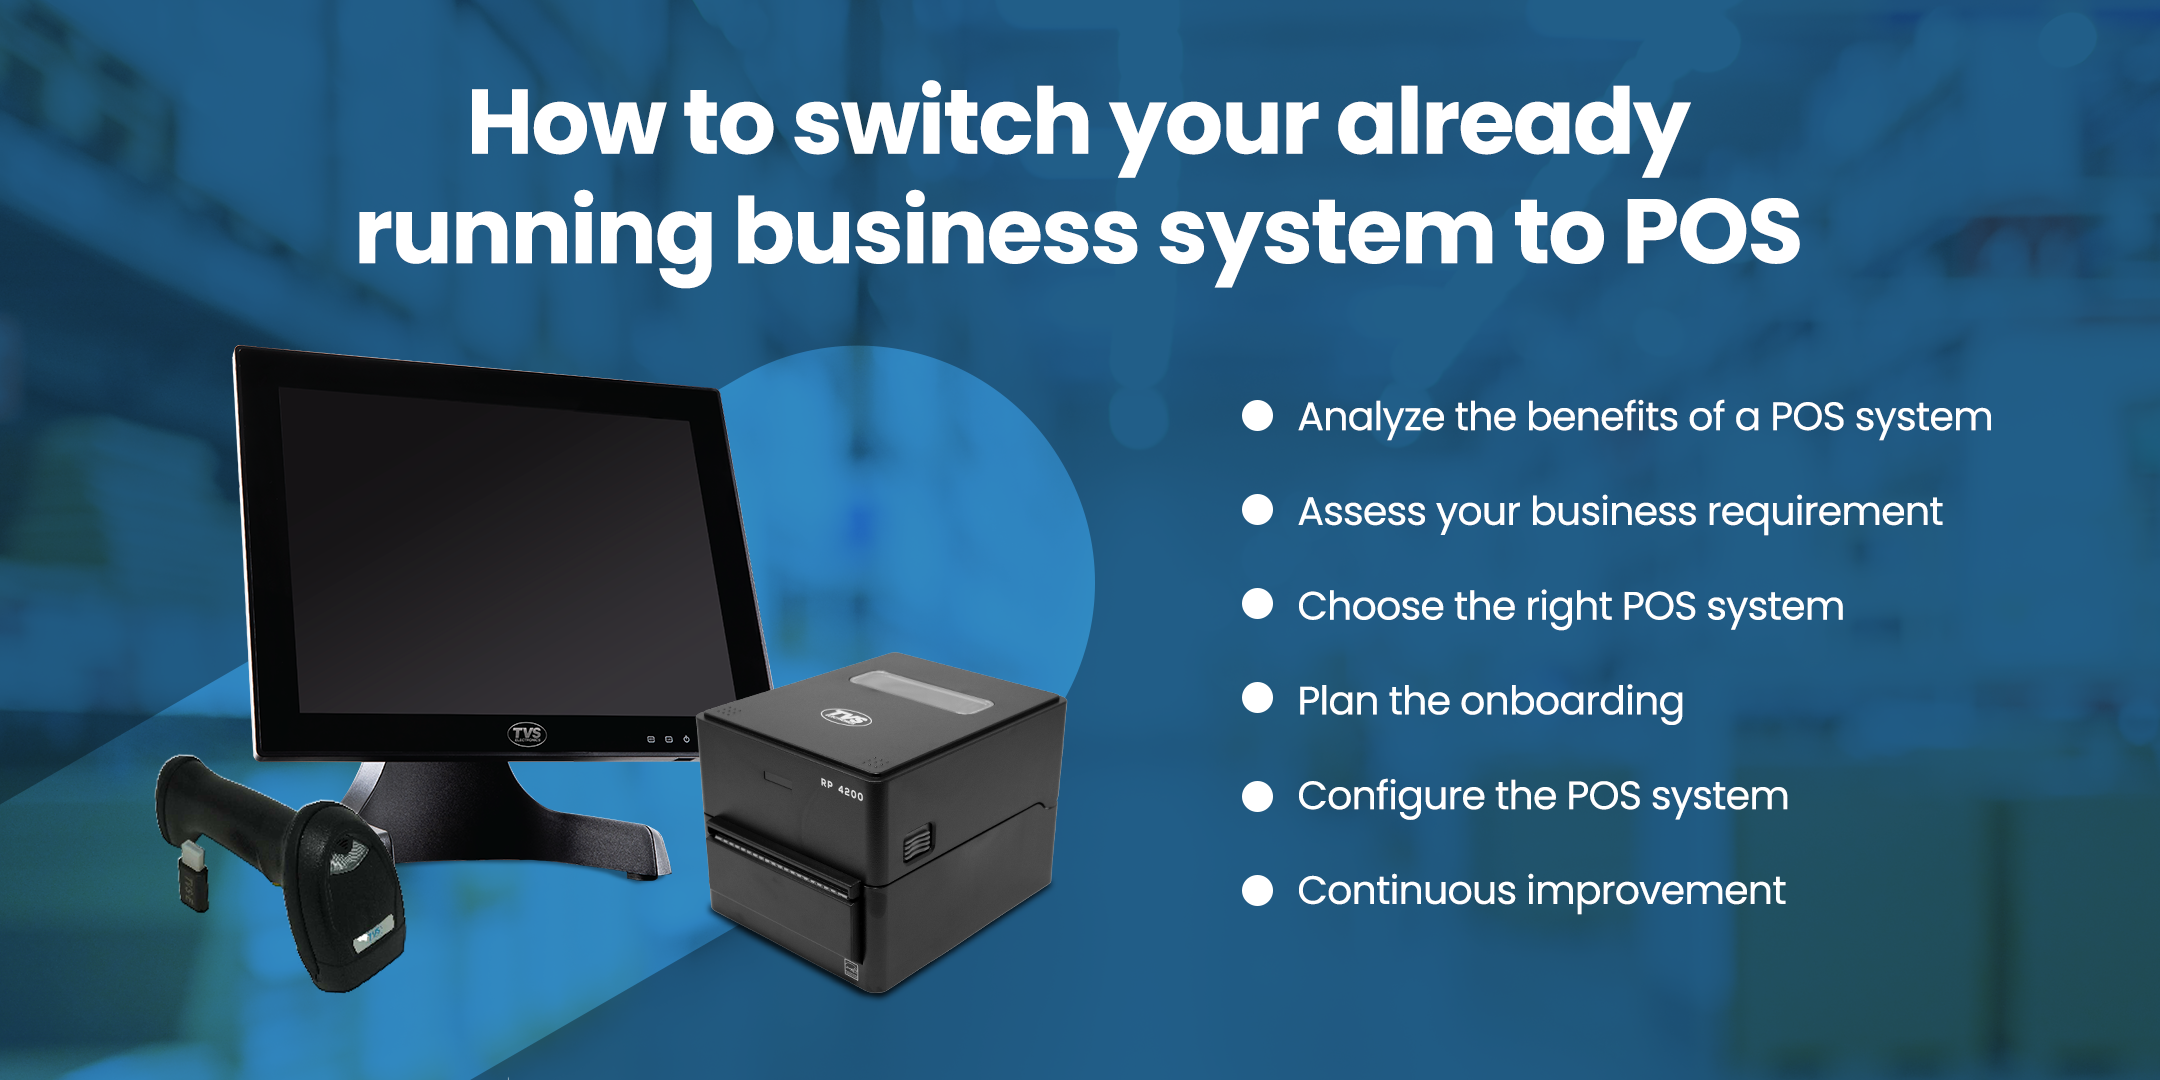 How do you switch your existing business system to a POS?